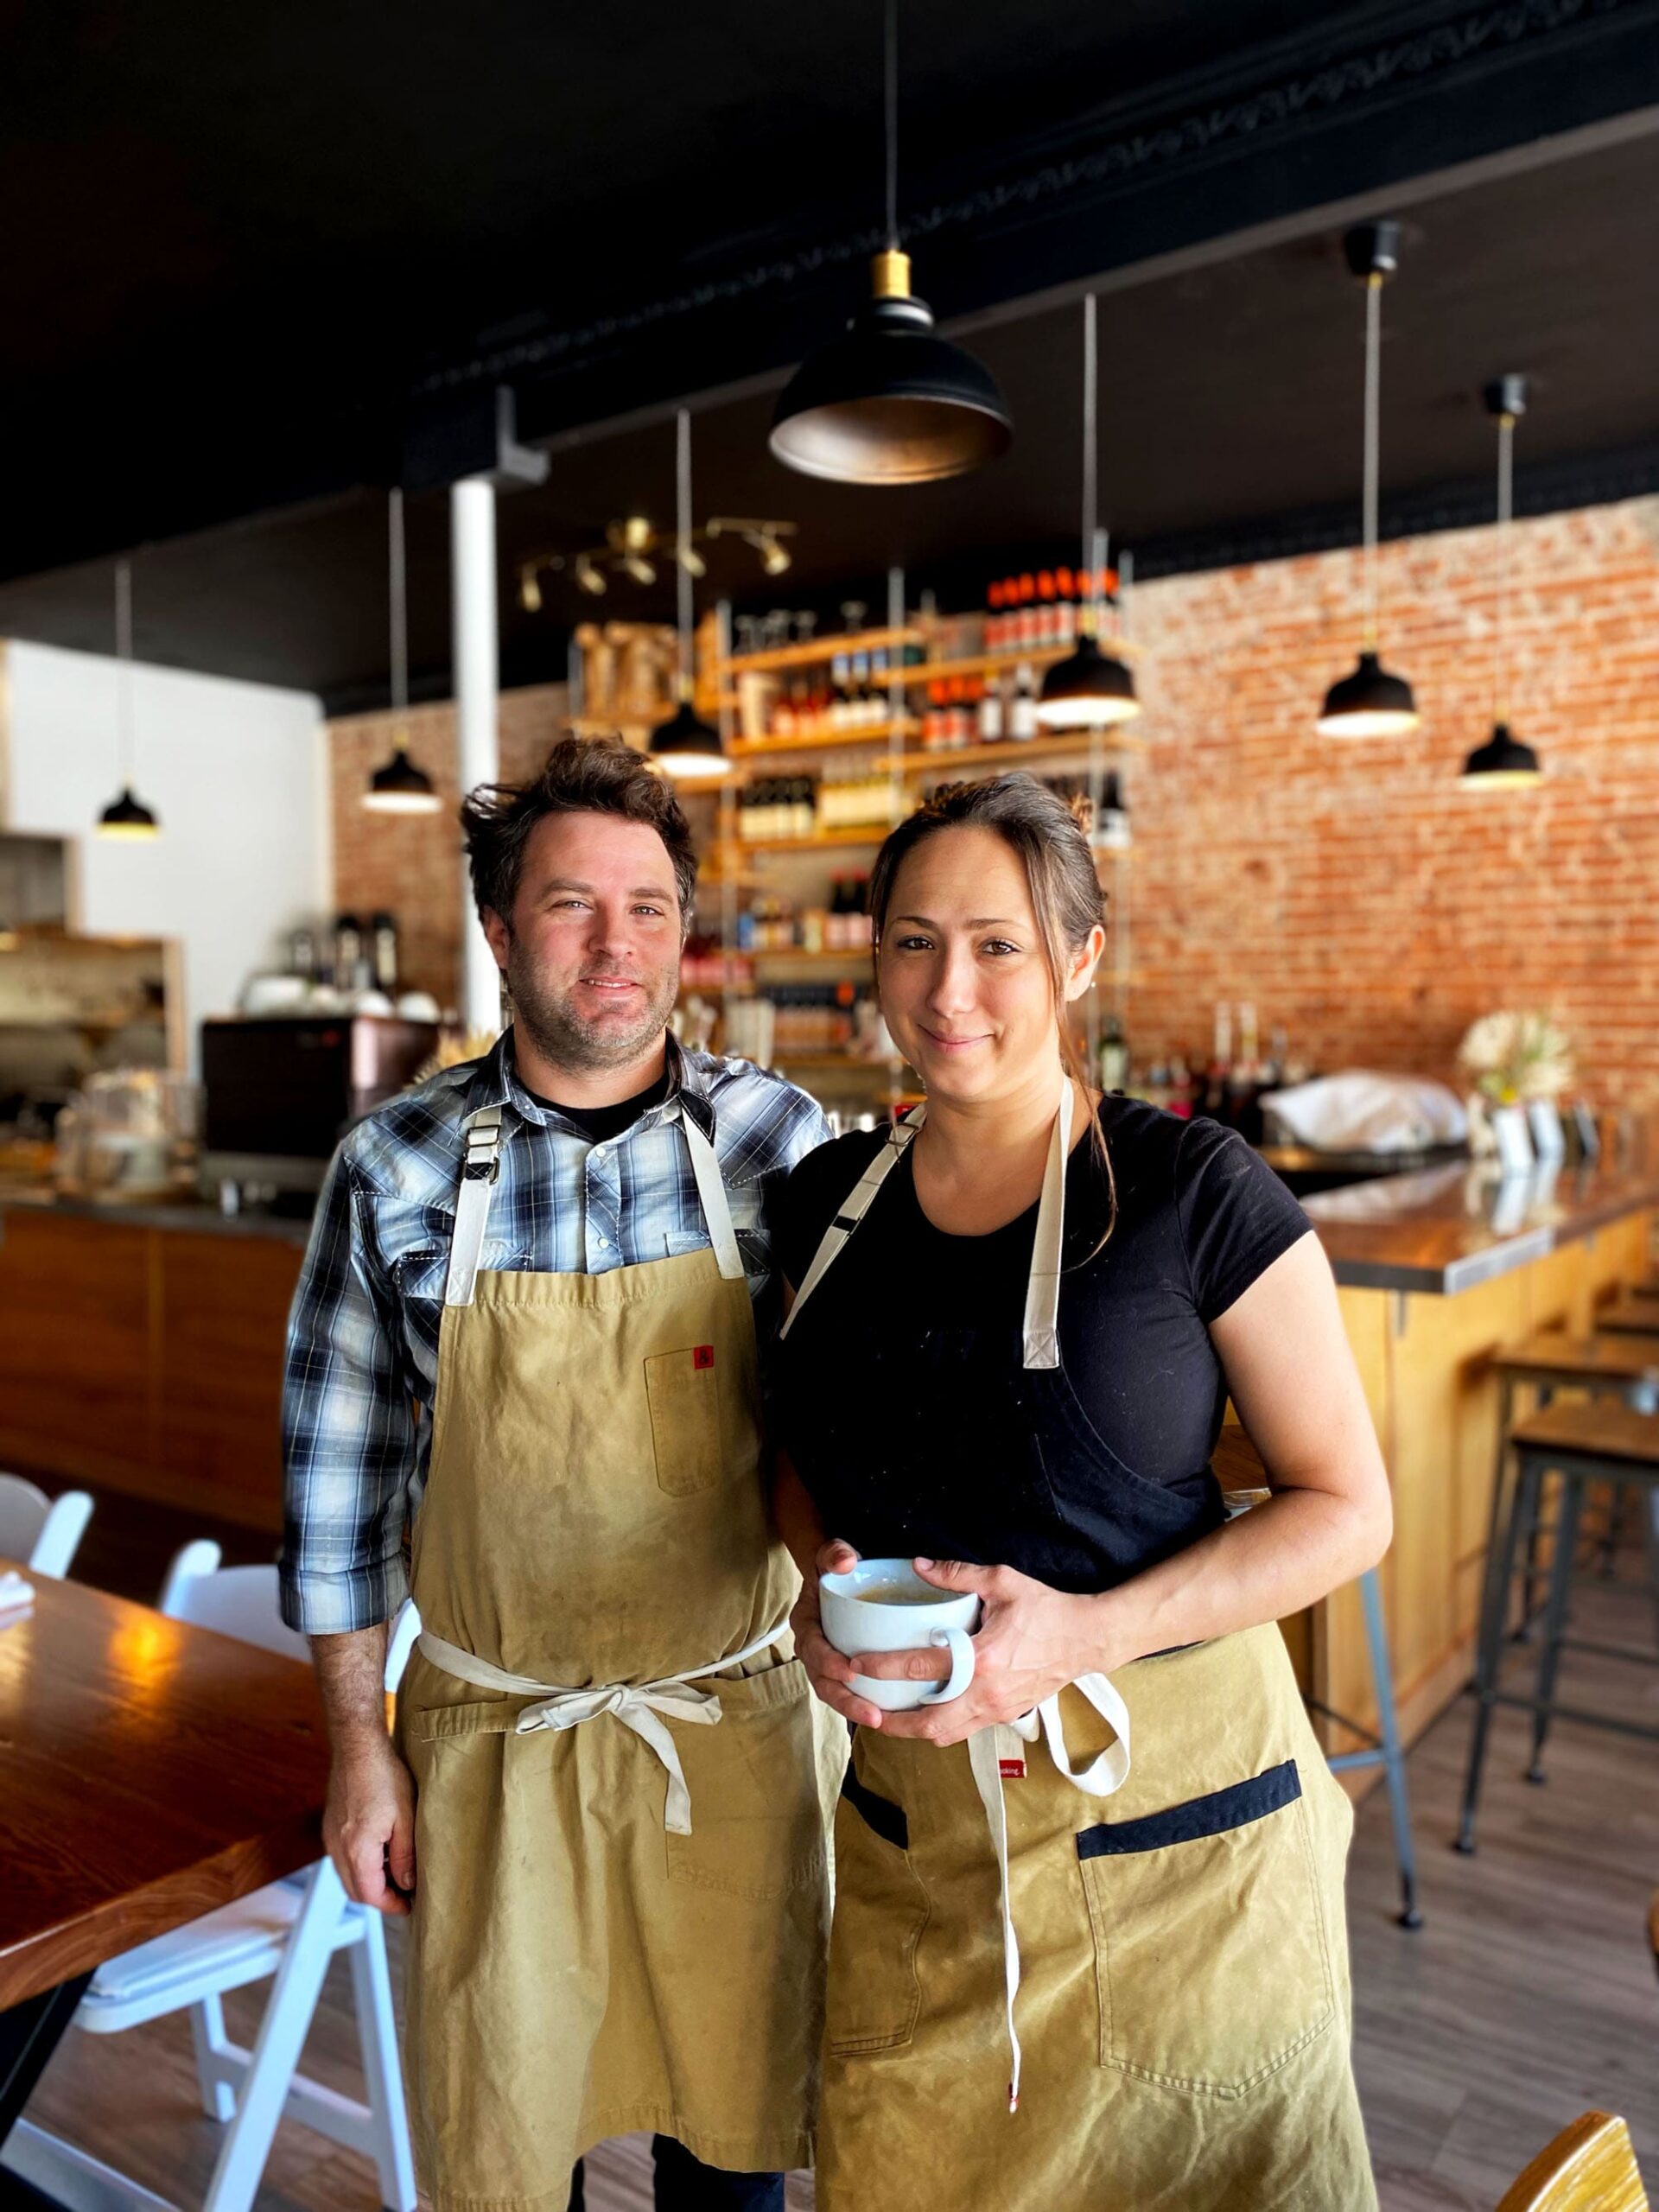 Chef/Owners Sarah Heard and Nathan Lemley standing together smiling in their restaurant, Commerce Cafe.